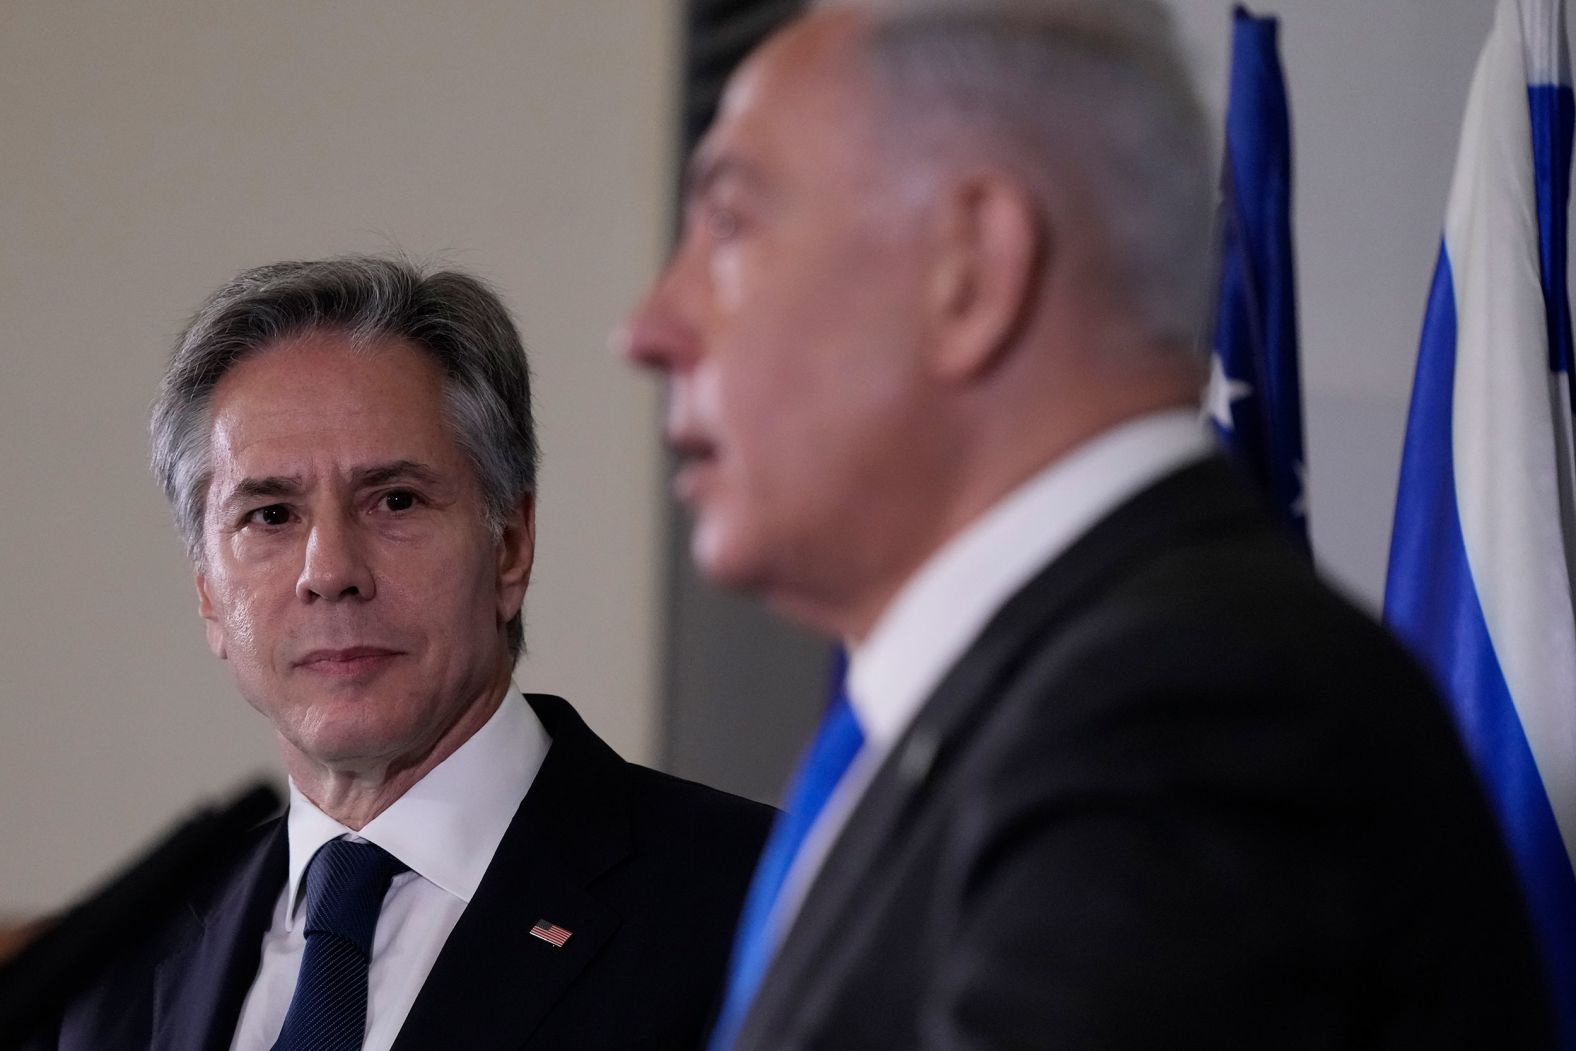 US Secretary of State Antony Blinken watches Israeli Prime Minister Benjamin Netanyahu make a statement to the media in Tel Aviv, Israel, on Thursday, October 12. Netanyahu said Hamas should be "crushed" and "spat out from the community of nations."